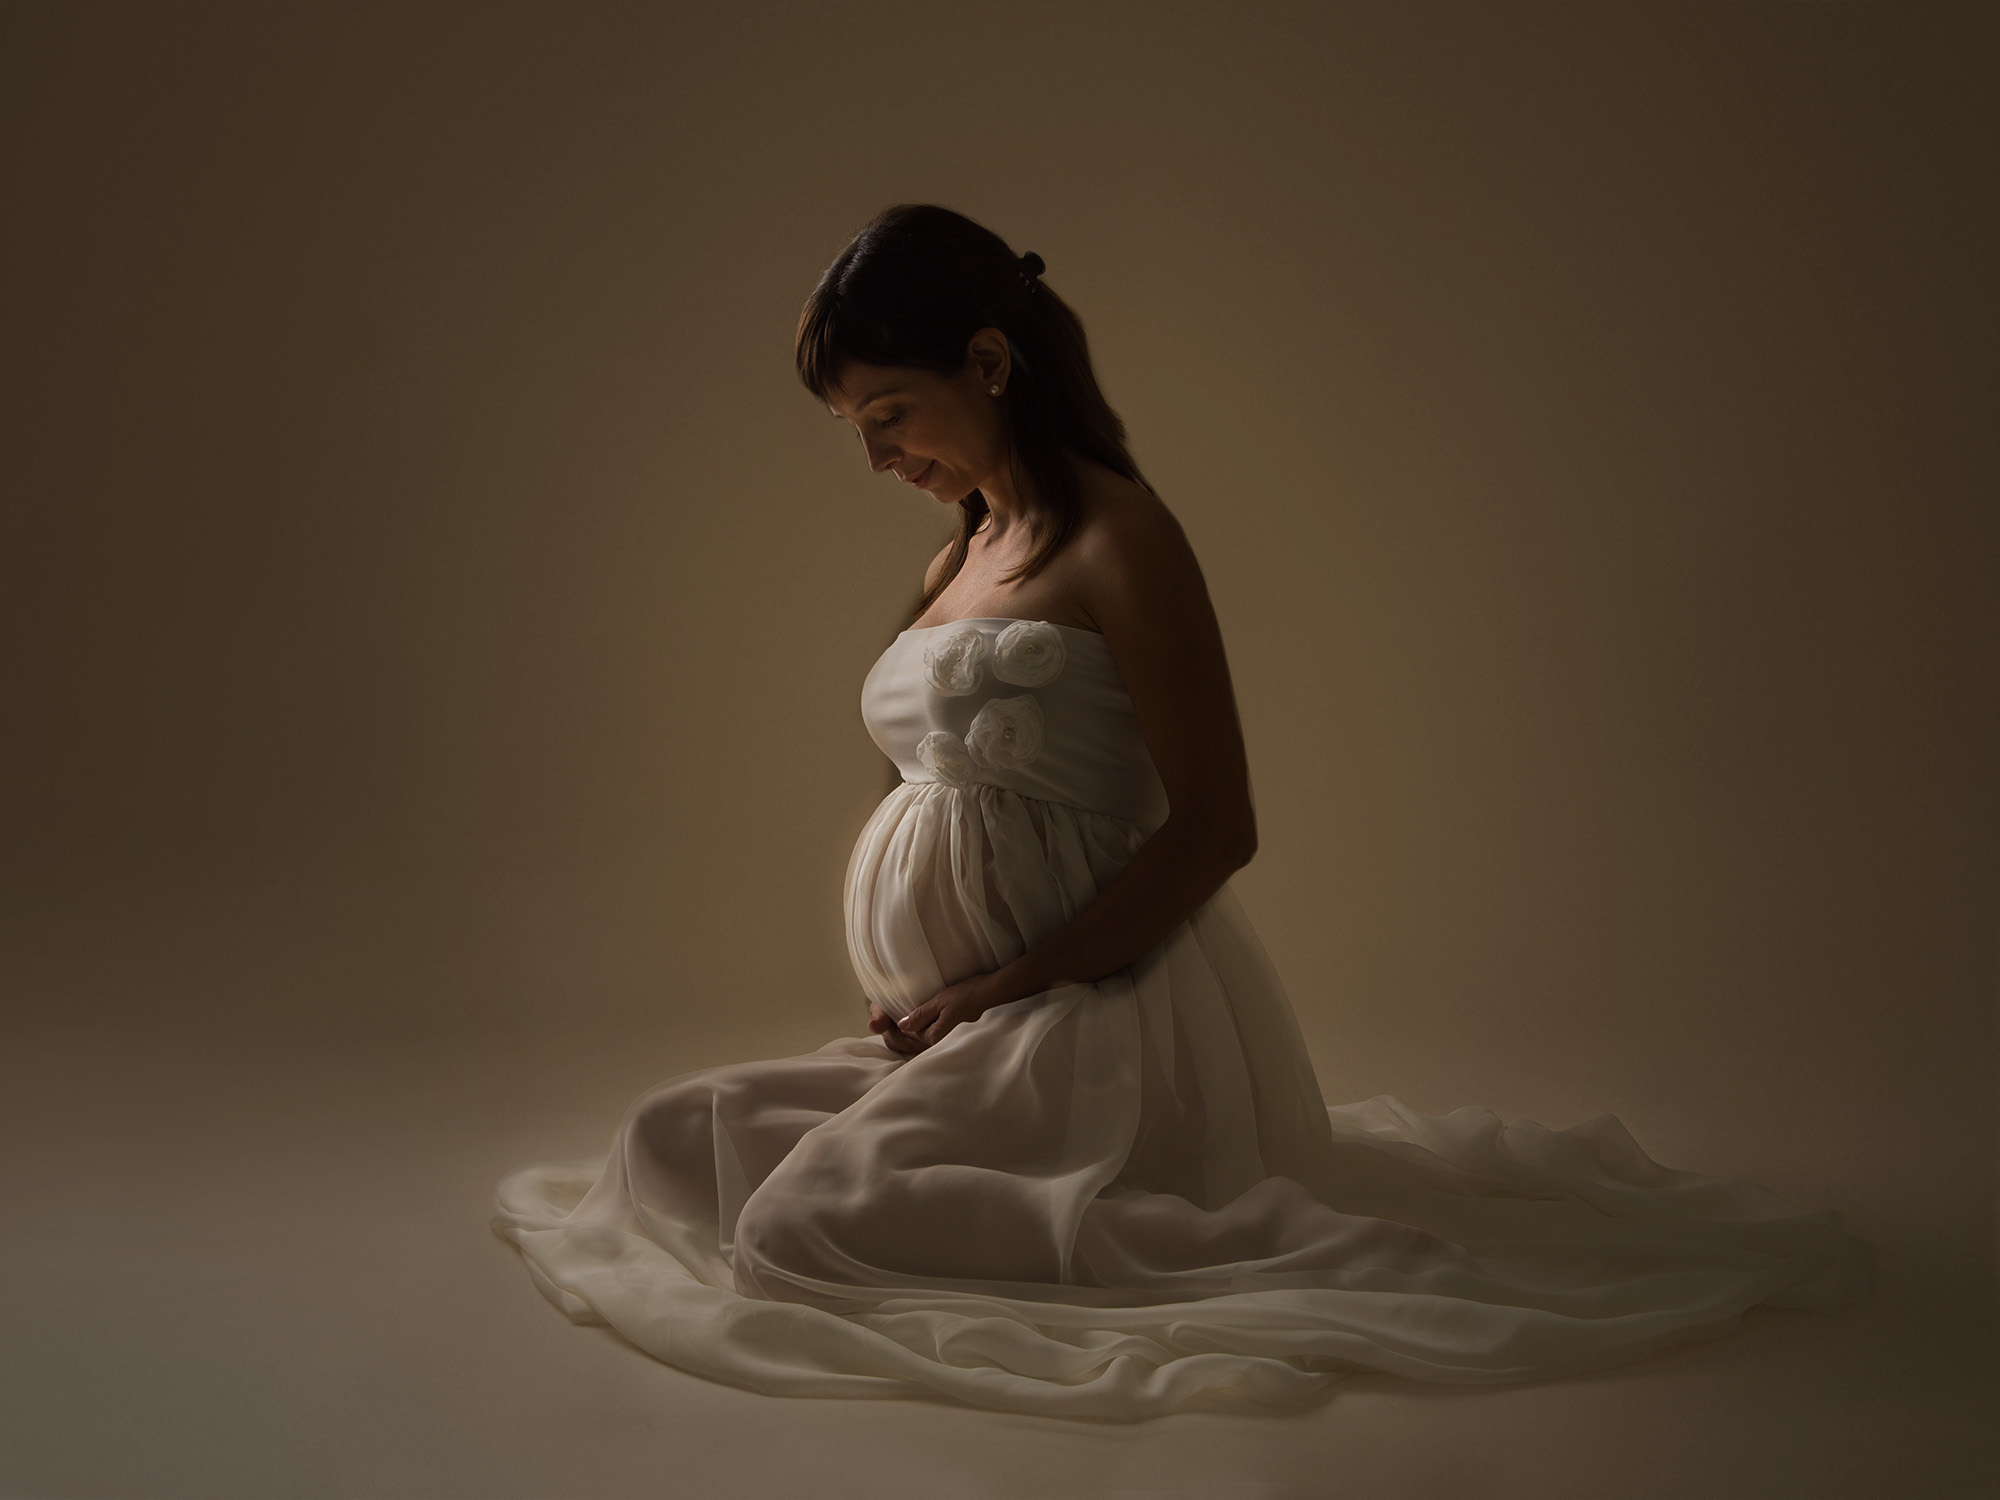 Silhouette maternity photo by maternity photographer Hampshire